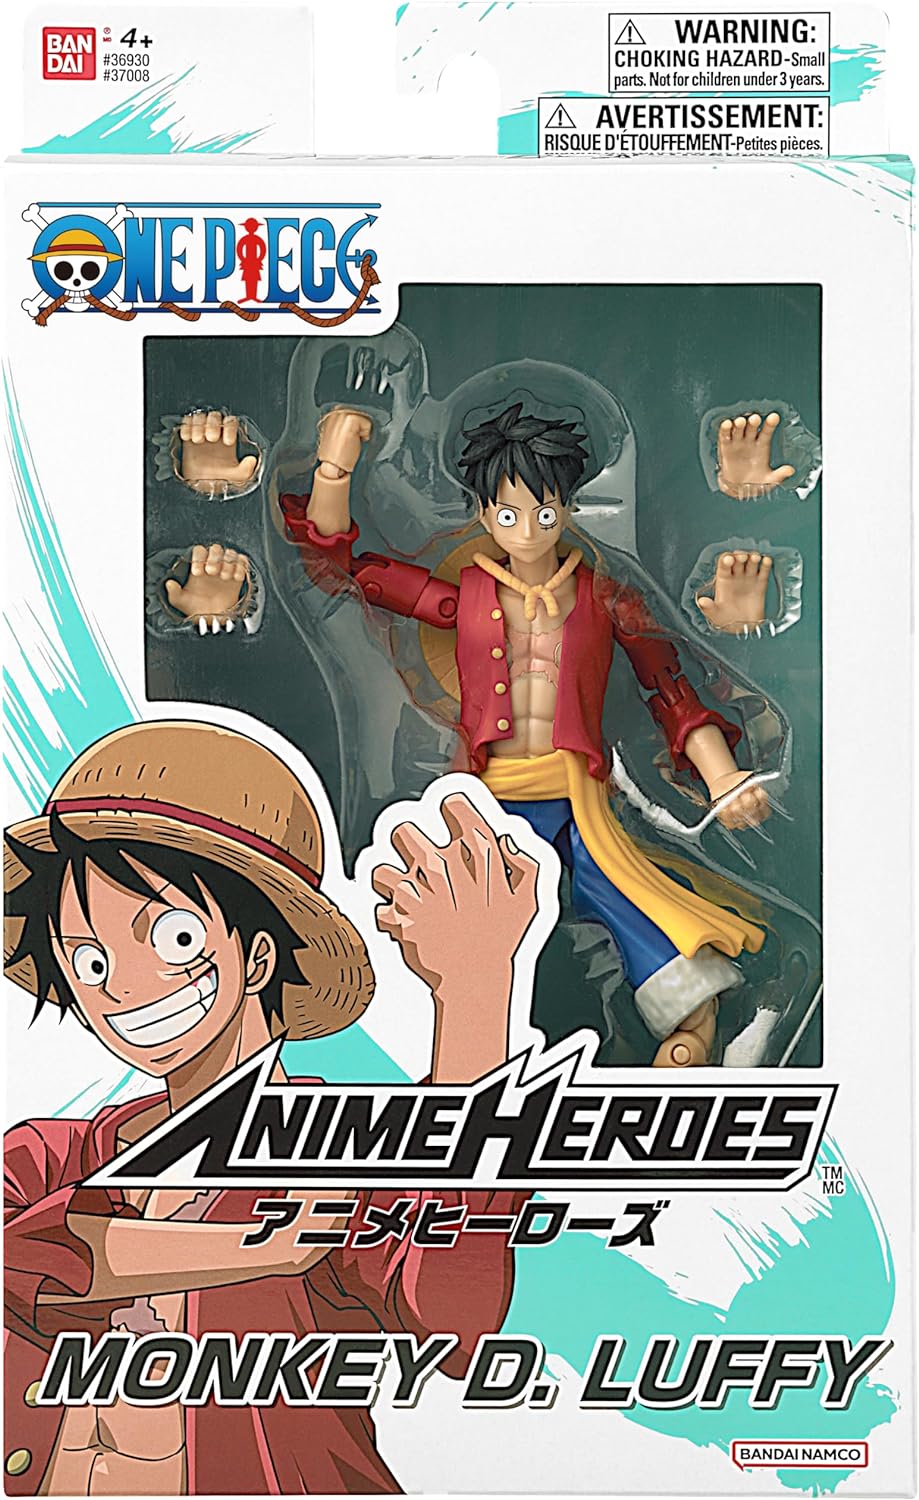 One Piece Anime Heroes Wave 1 Action Figure Set